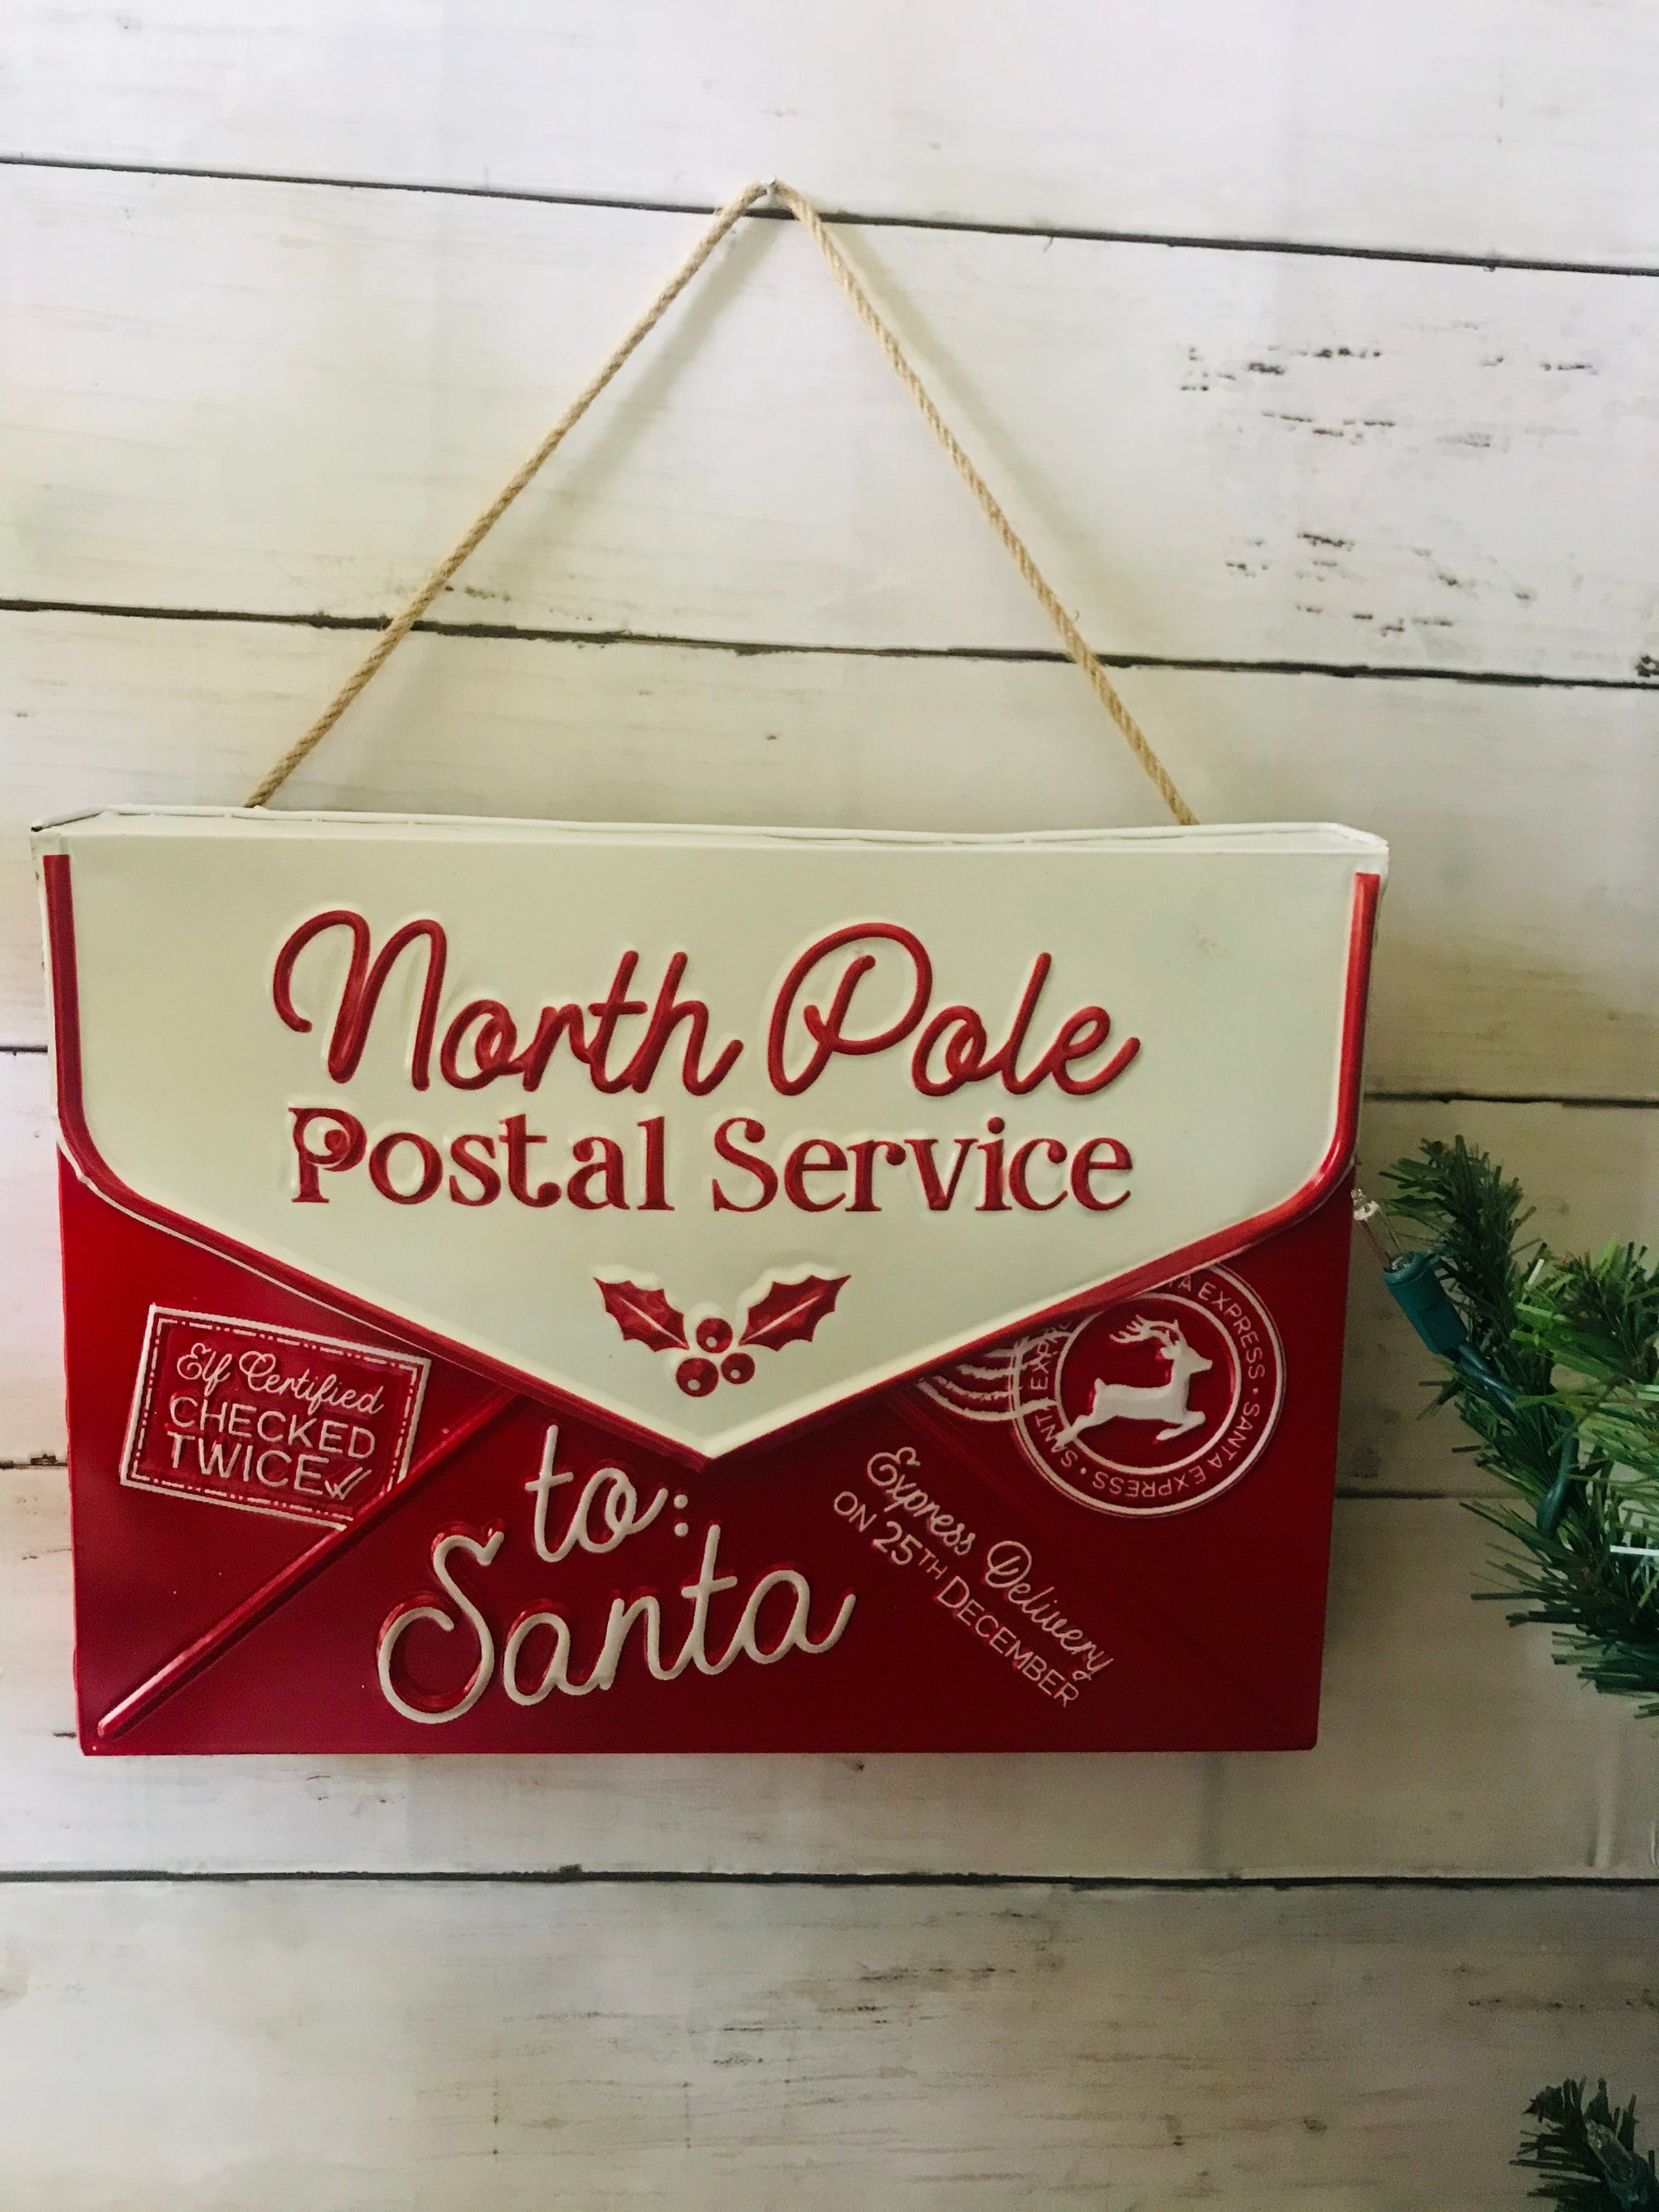 *North Pole Mail Pouch